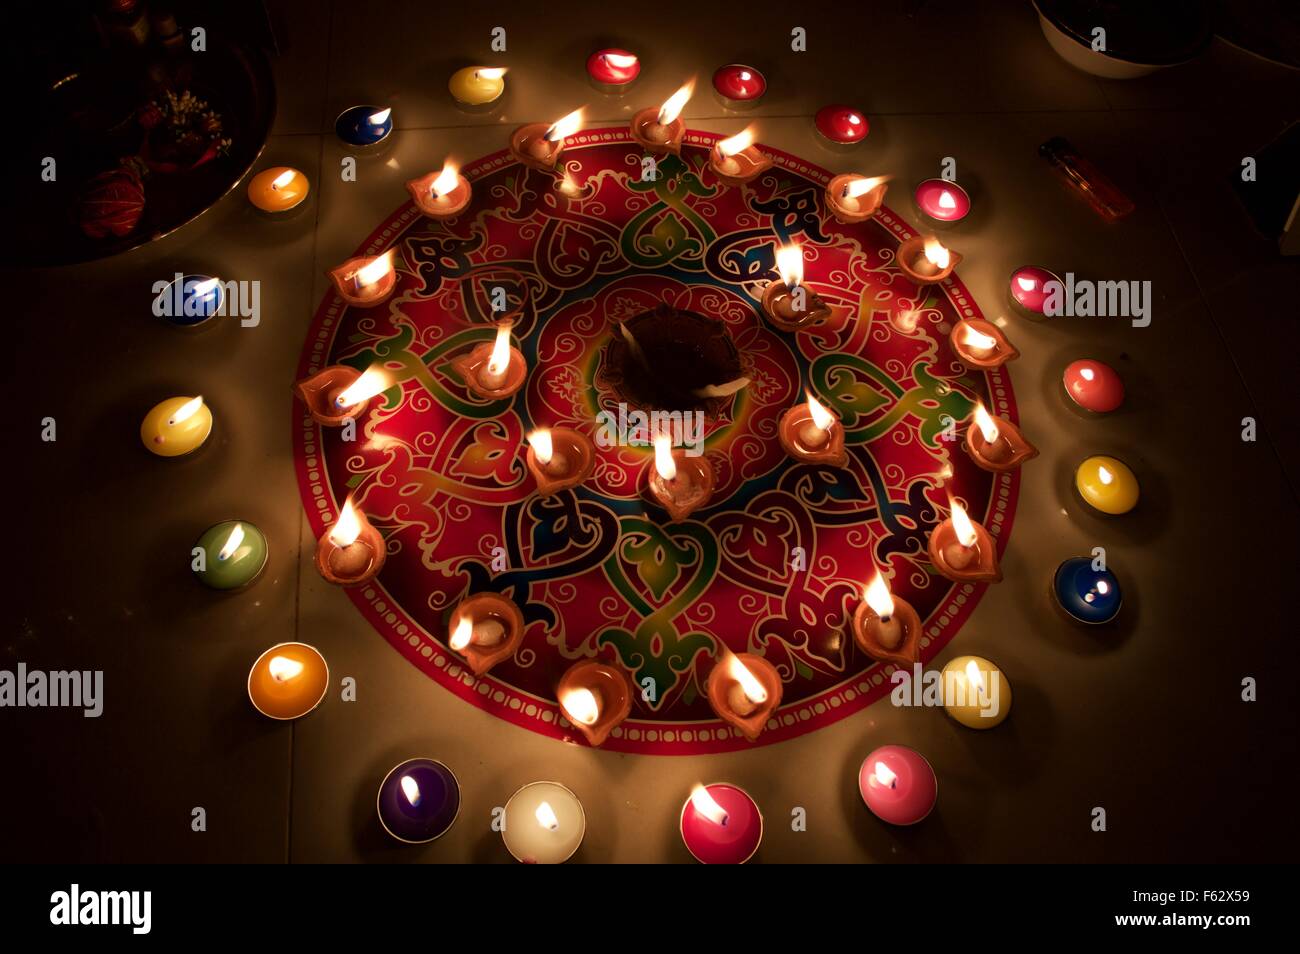 Indian festival diwali and burning candle Stock Photo